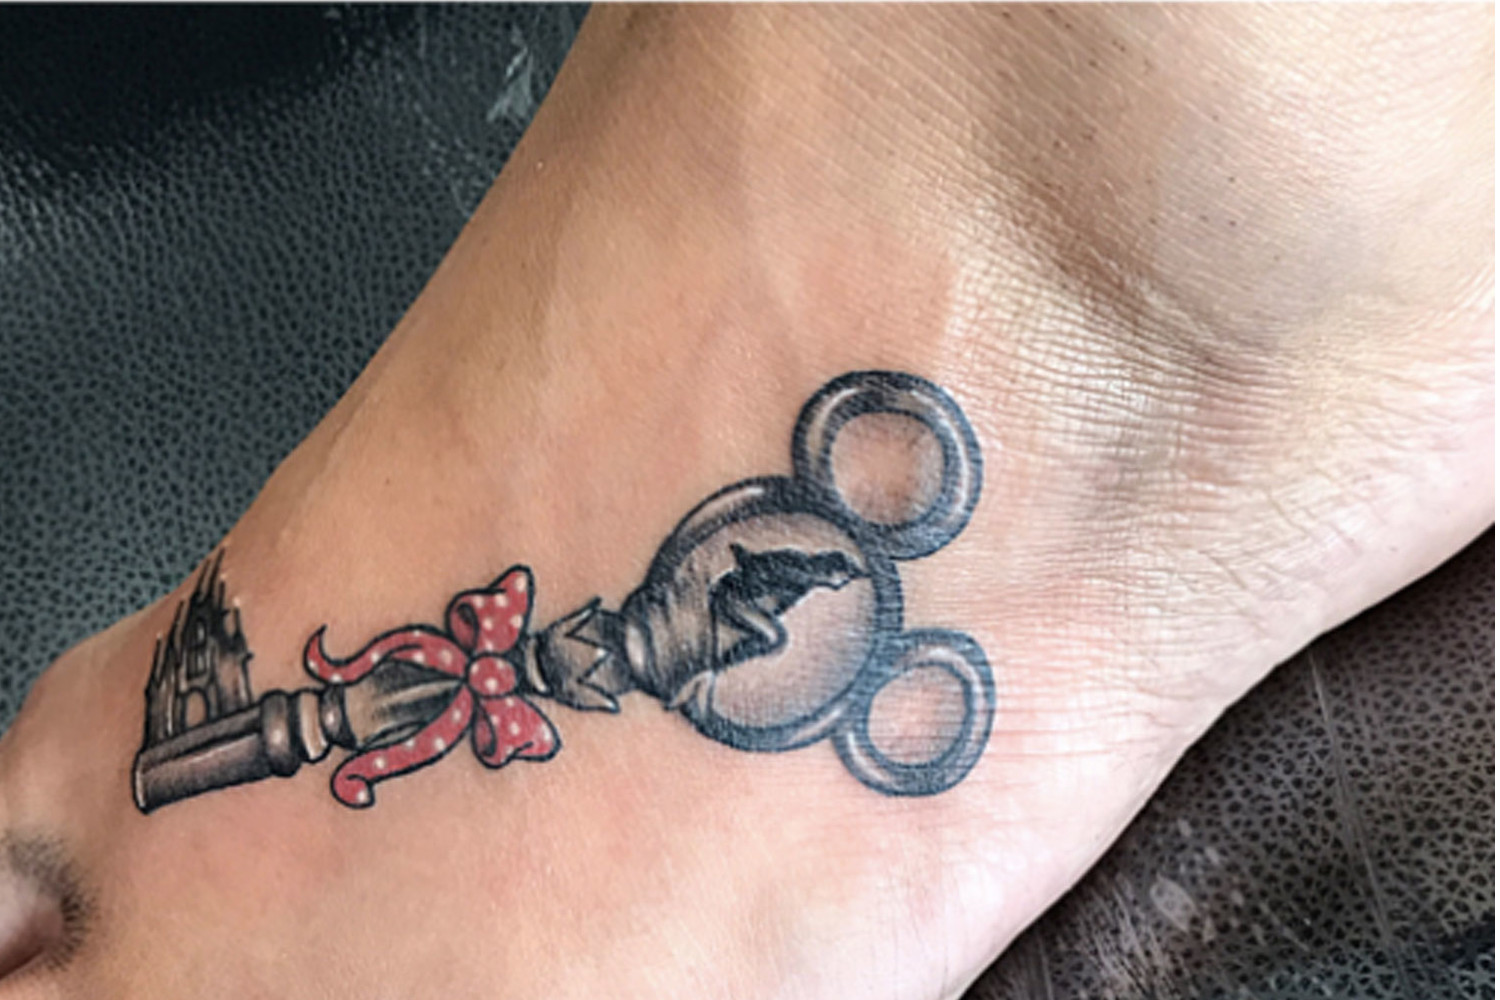 53 Mickey Mouse Tattoo Ideas with Names  Tattoo Glee